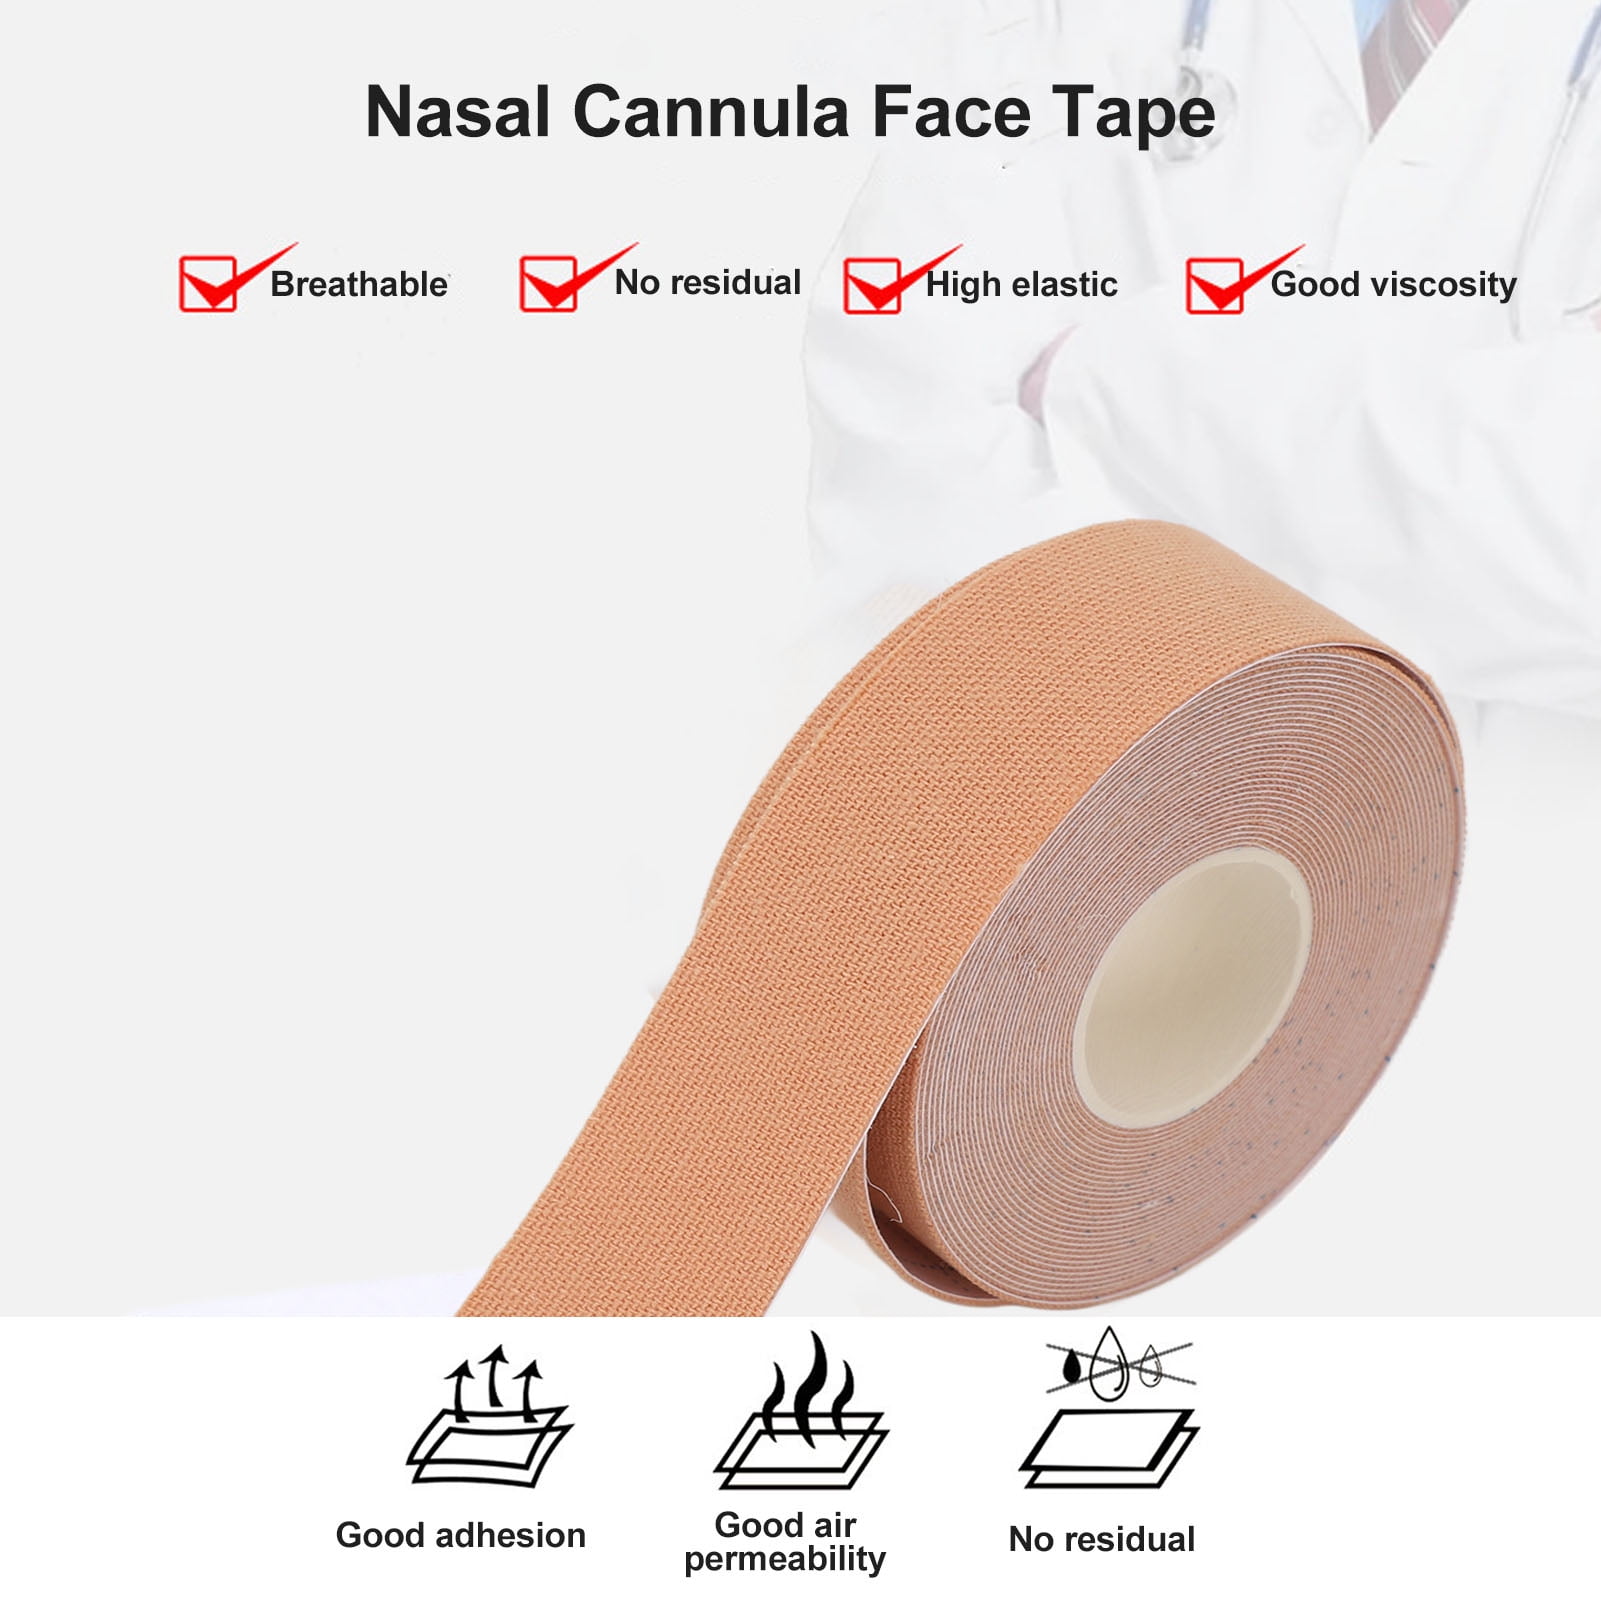  ovand Nasal Cannula Tape, Nasal Cannula Adhesives Oxygen Tubing  Tape Face Adhesives Facial Skin Tapes,Medical Tape for Wound Care Bandages  Strips,Athletic Tape,Sports Wrap Bandages,1 Roll,5m. (1 inch) : Health &  Household